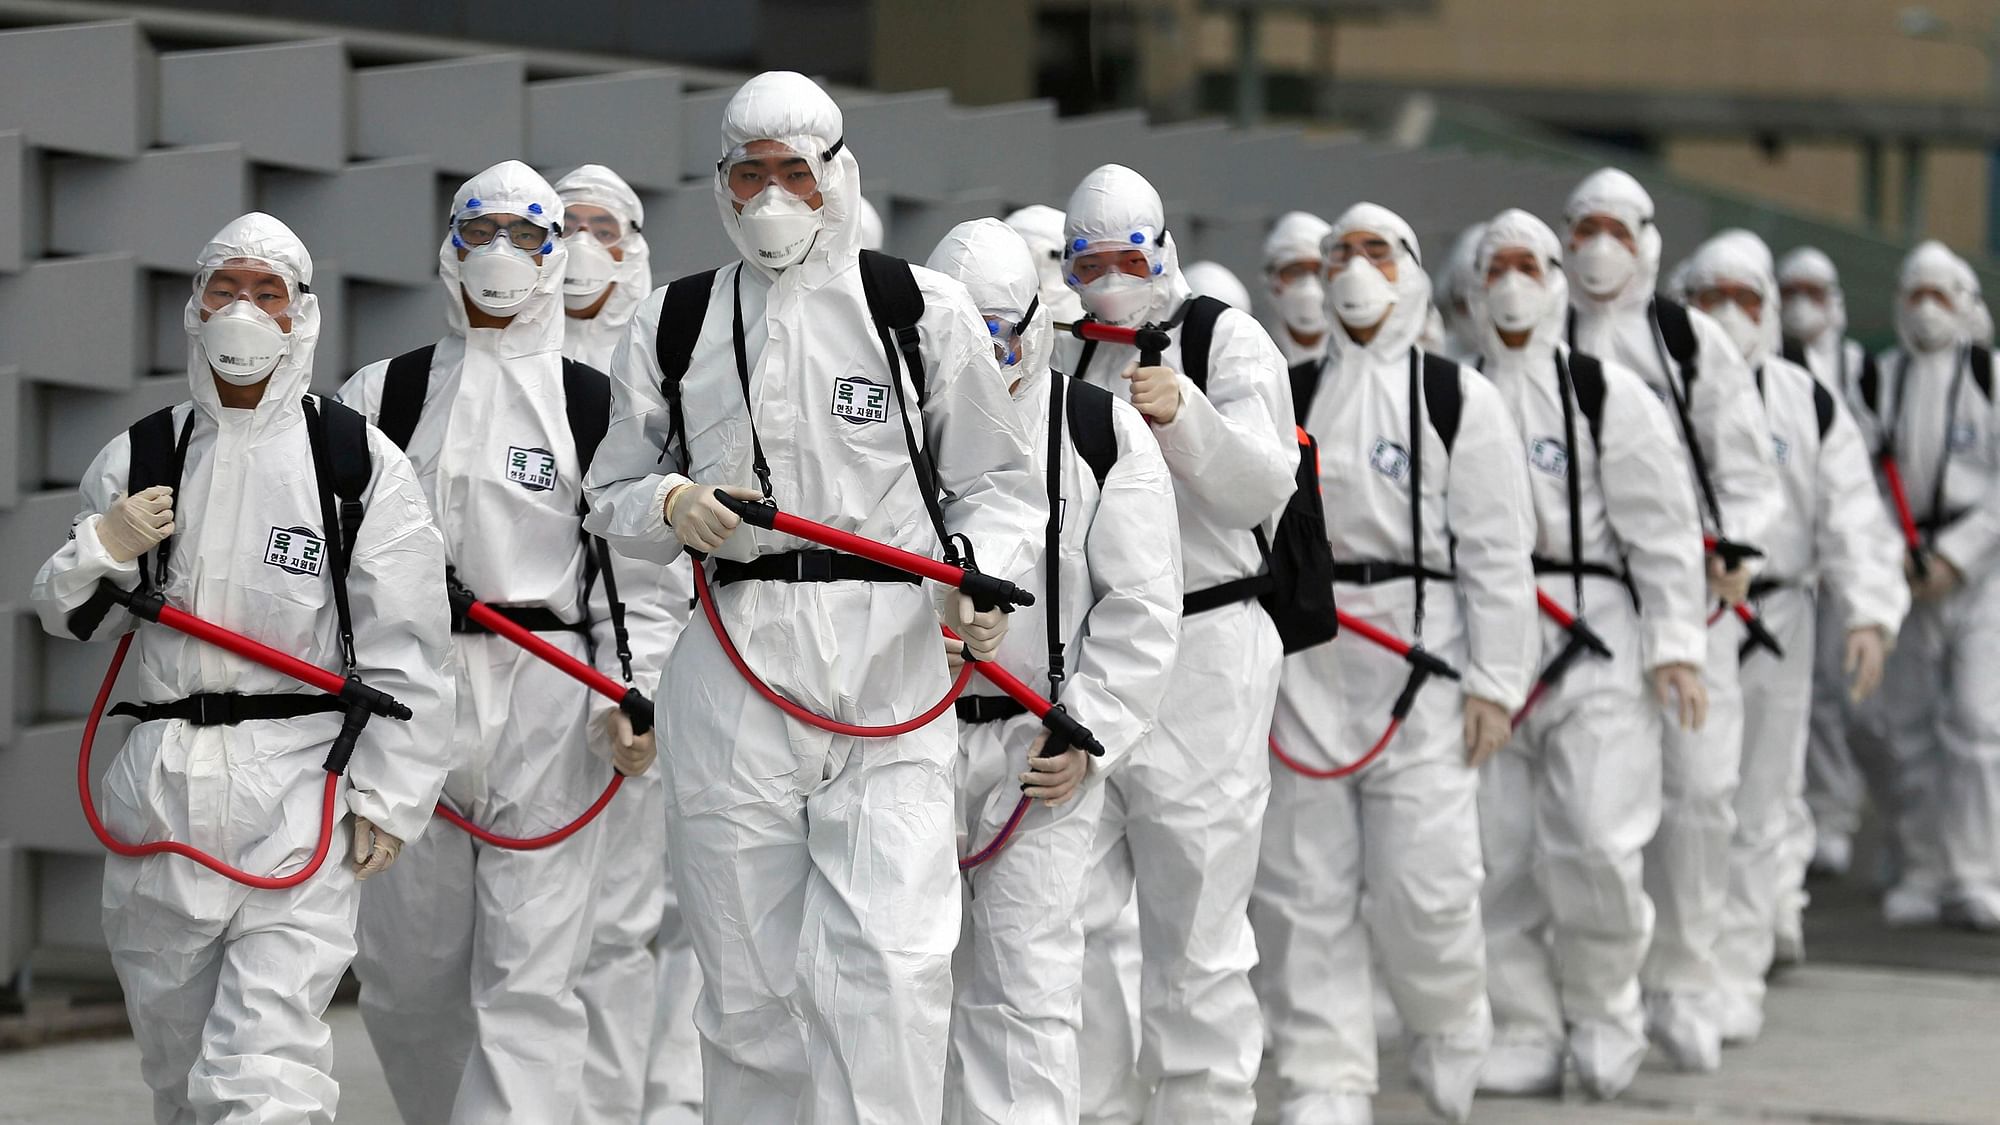 South Korean Army soldiers wearing protective gear gather to spray disinfectant to prevent the spread of the novelcoronavirus at the Dongdaegu train station in Daegu, South Korea, Saturday, 29 Feb 2020.